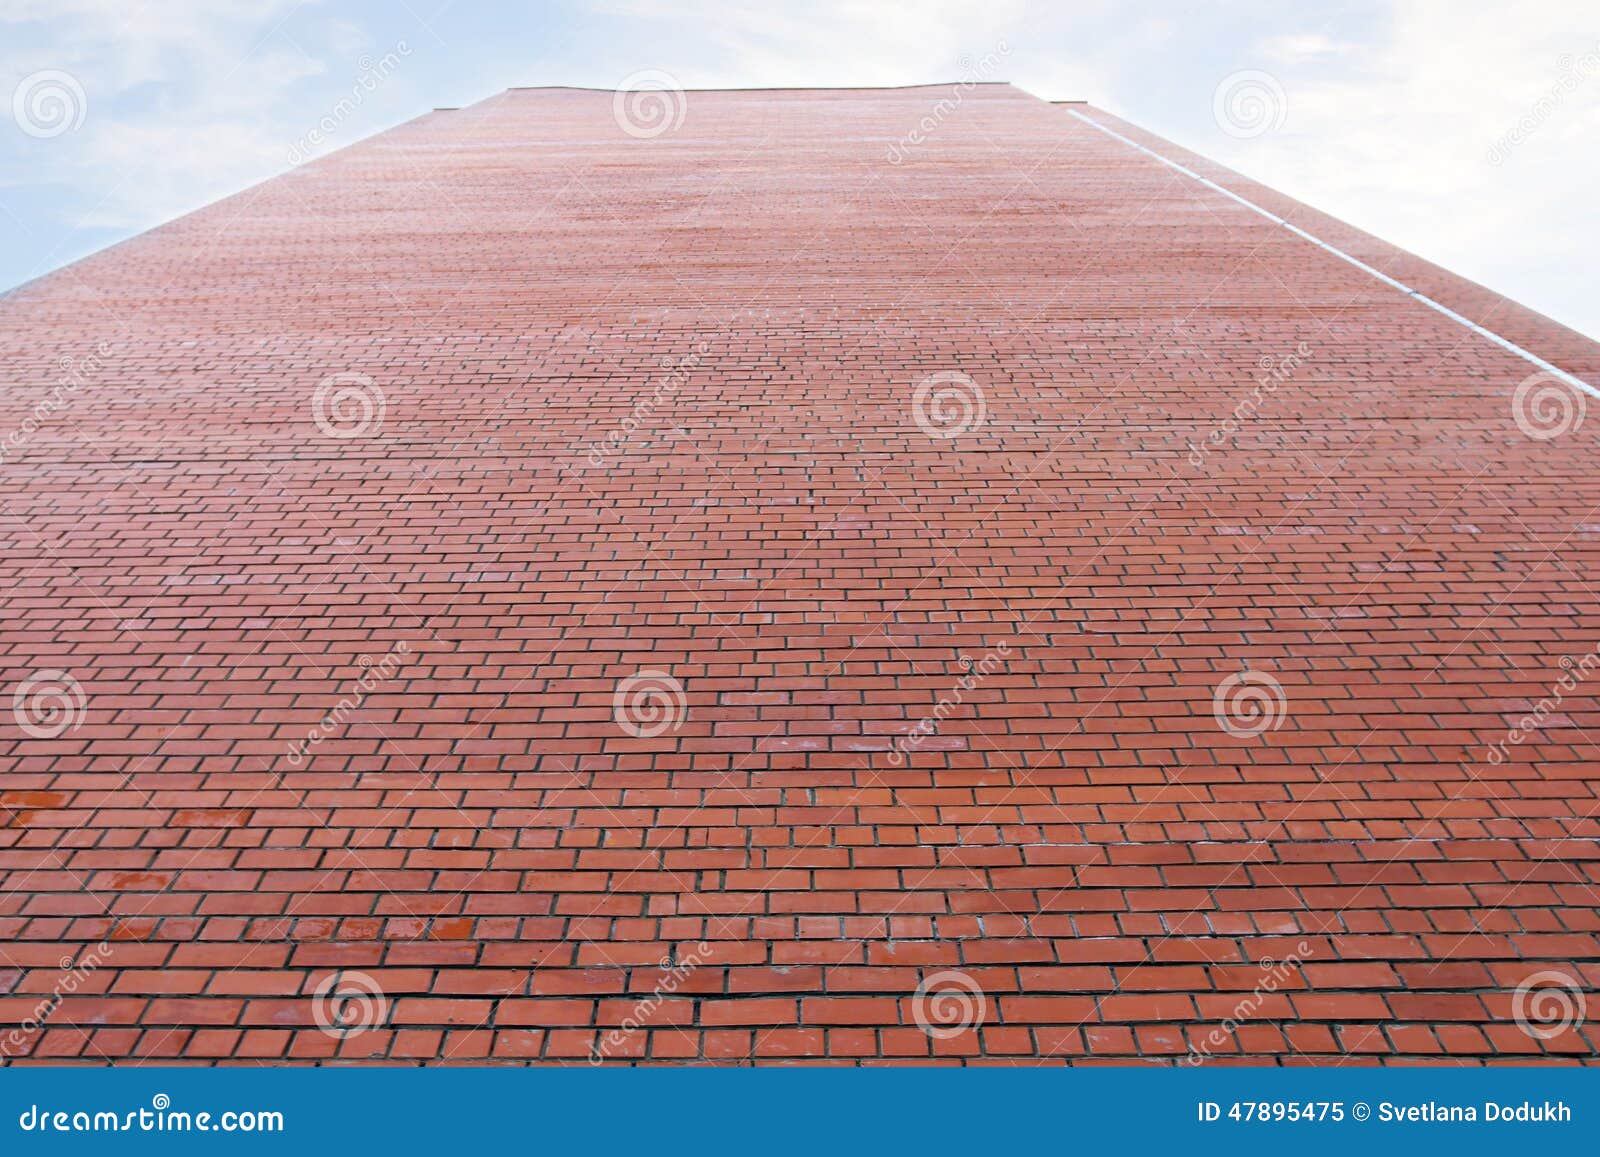 very high wall of red brick building and cloudy sky